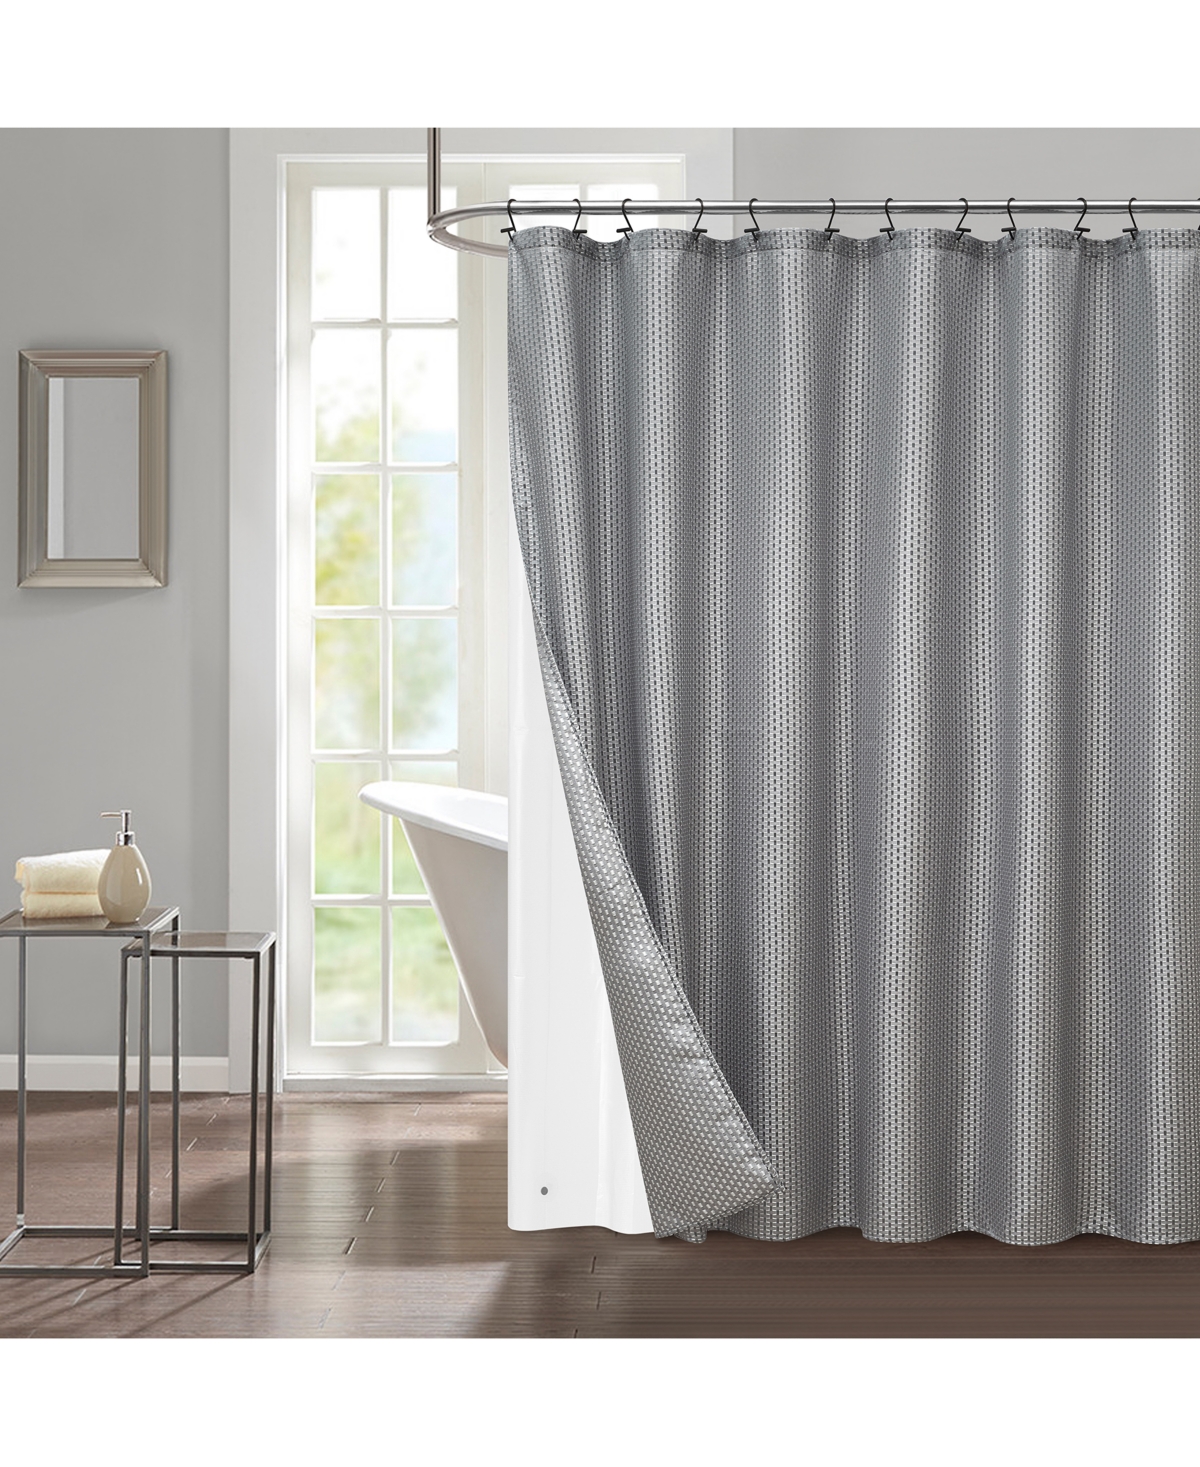 Style Nest Grey Wave Woven Texture 14 Pc Shower Curtain Set